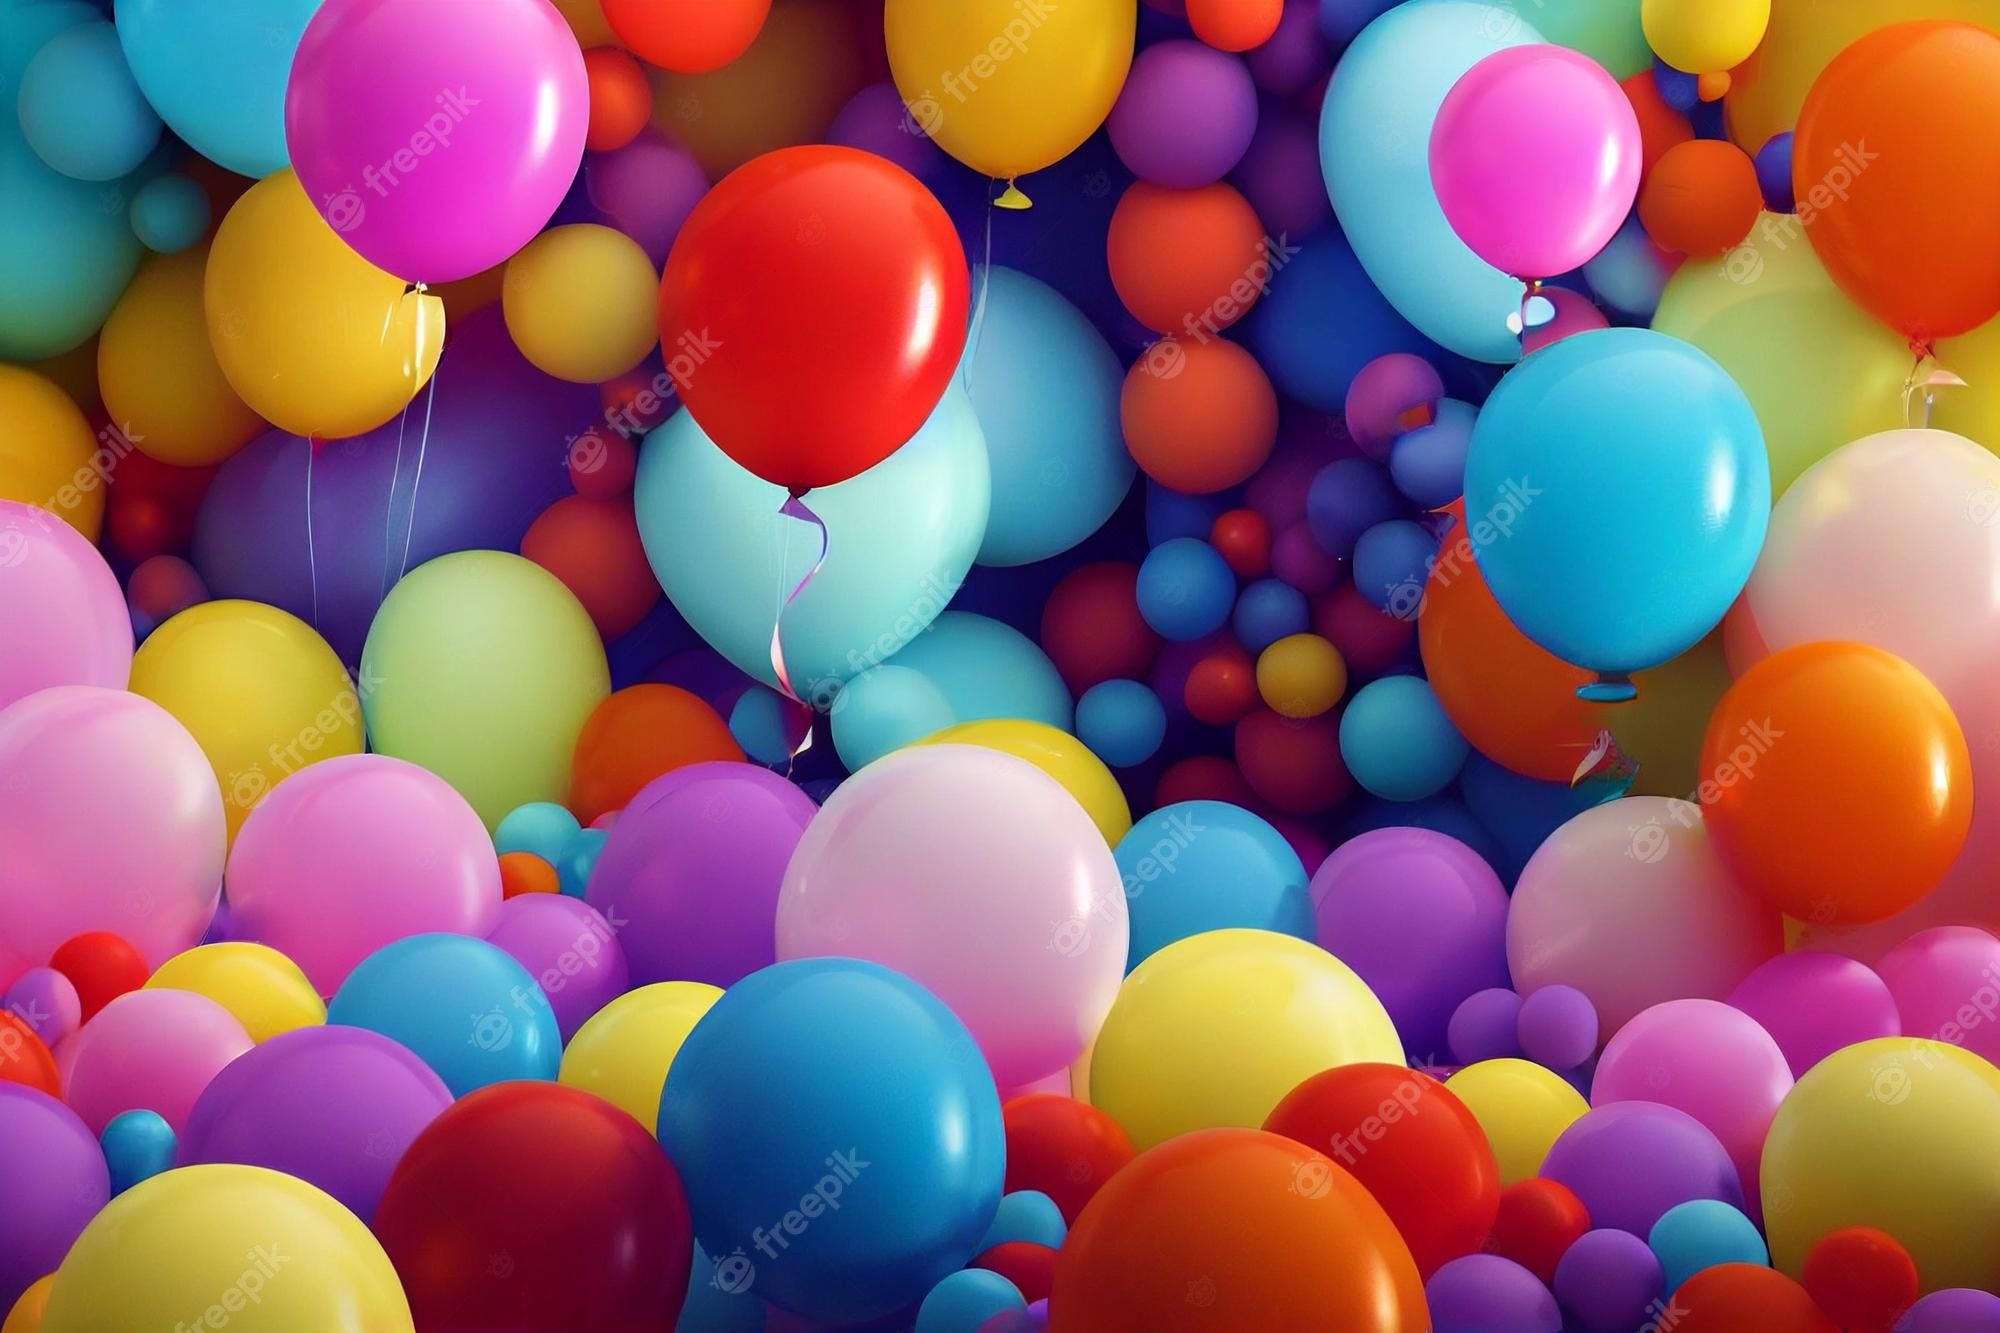 Colorful balloons flying in the air - Balloons